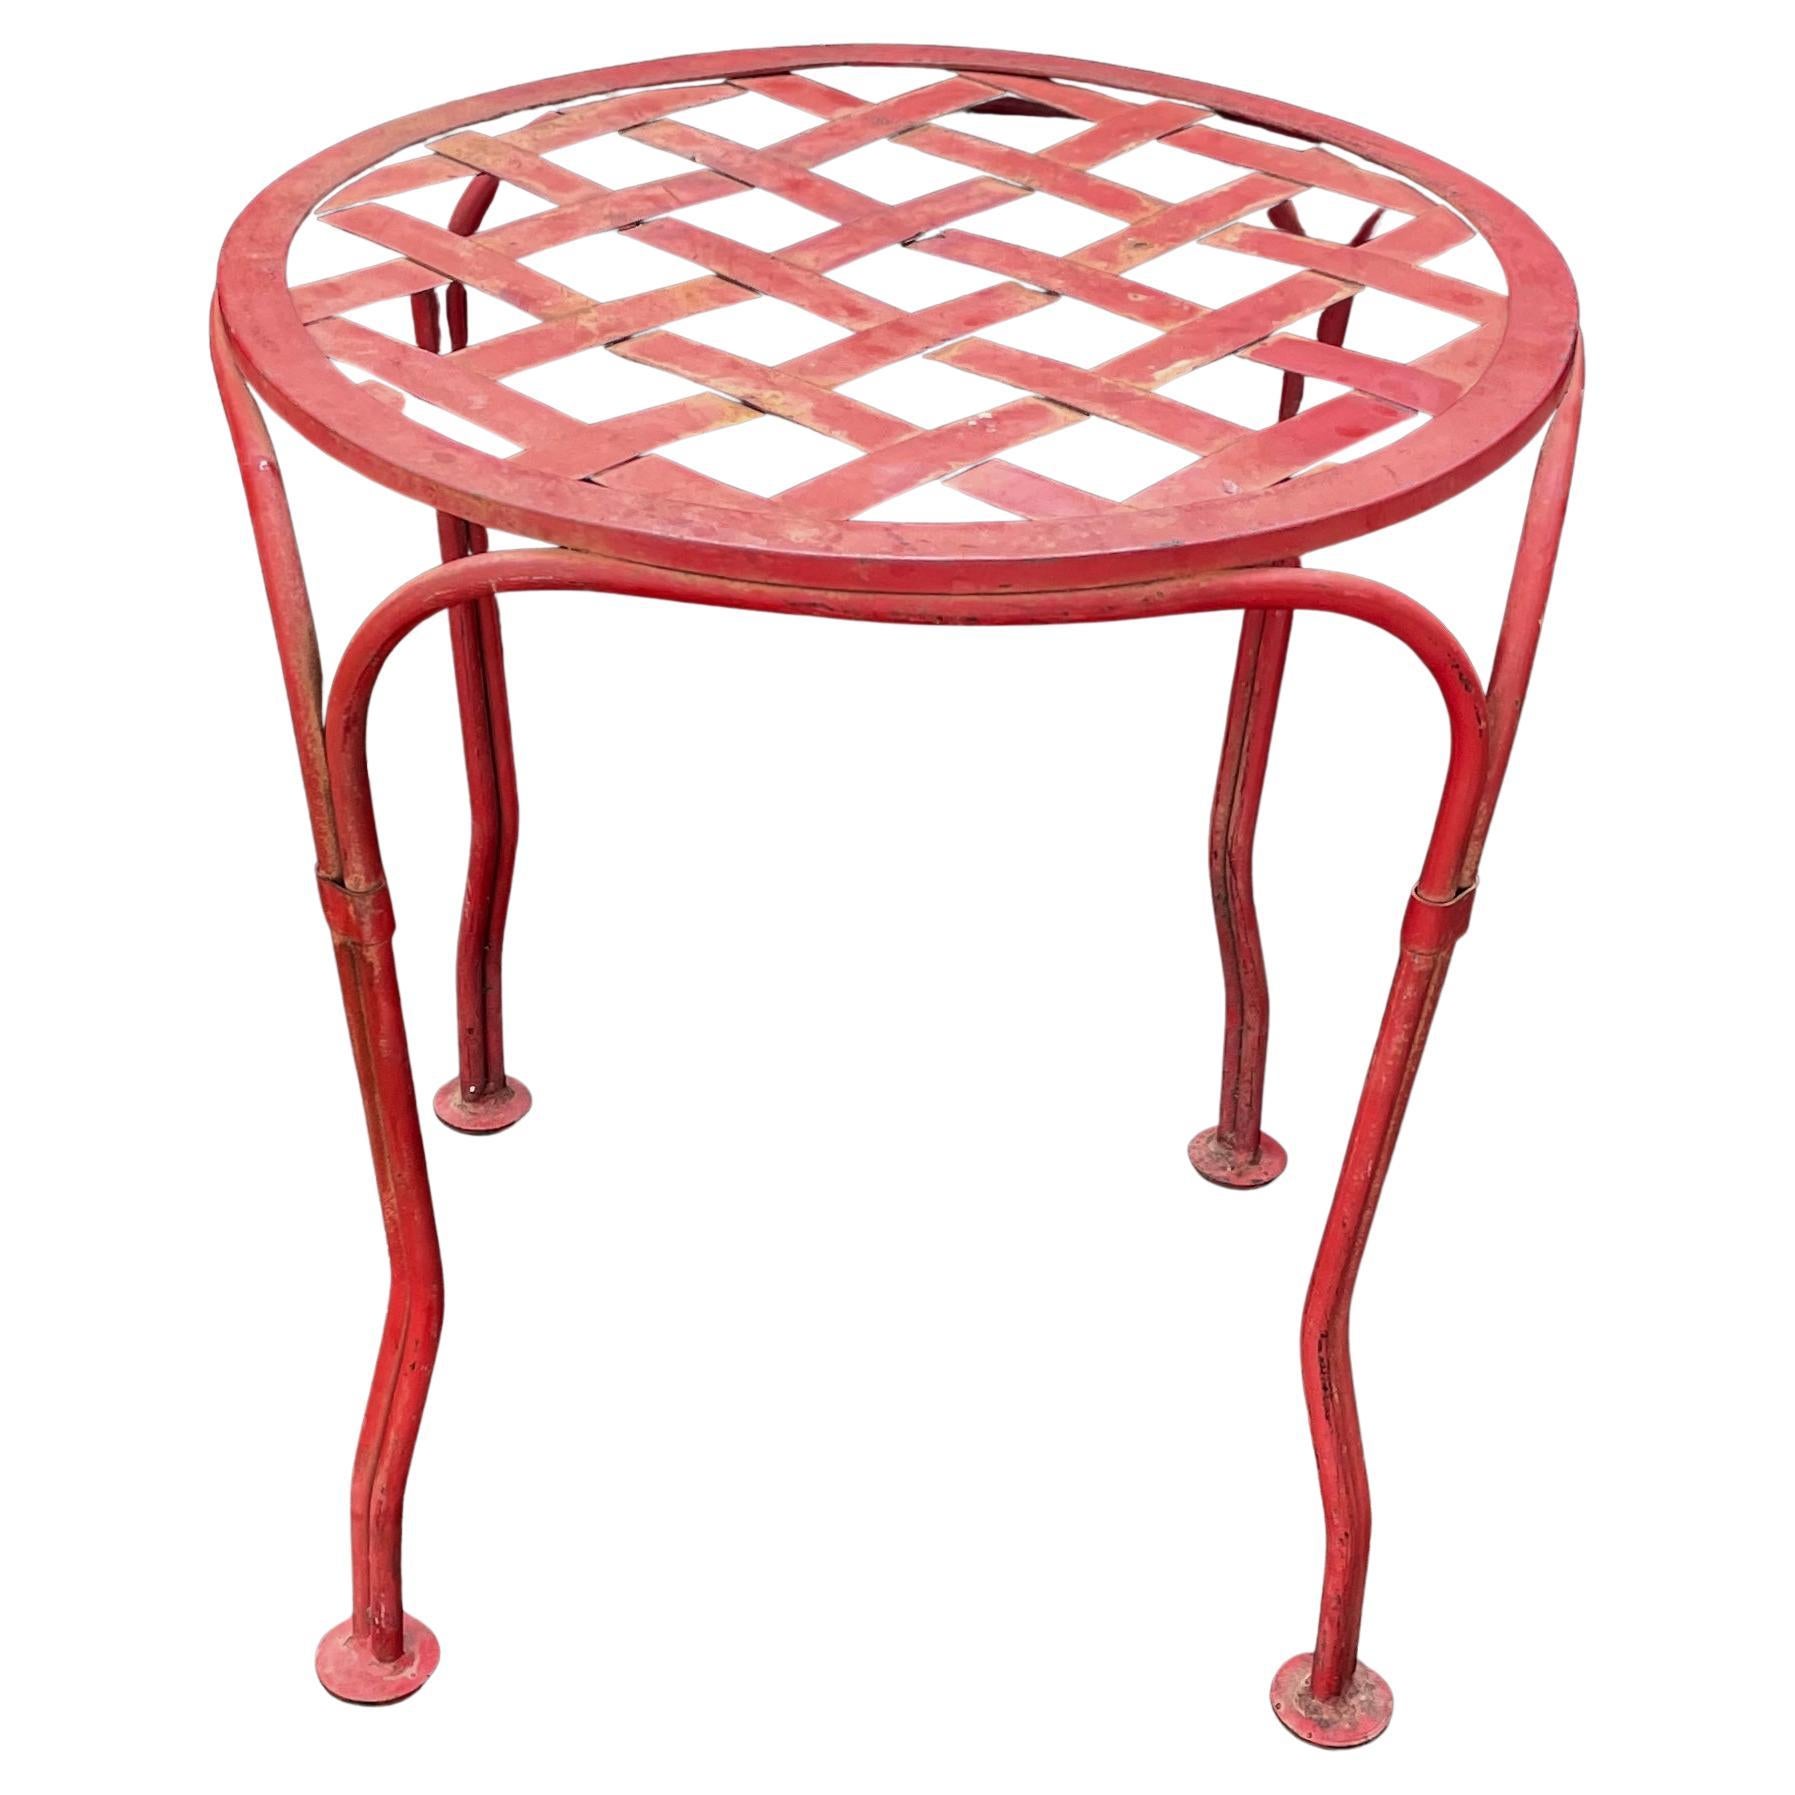 Chinoiserie Red Basketweave Stool or Side Table For Sale